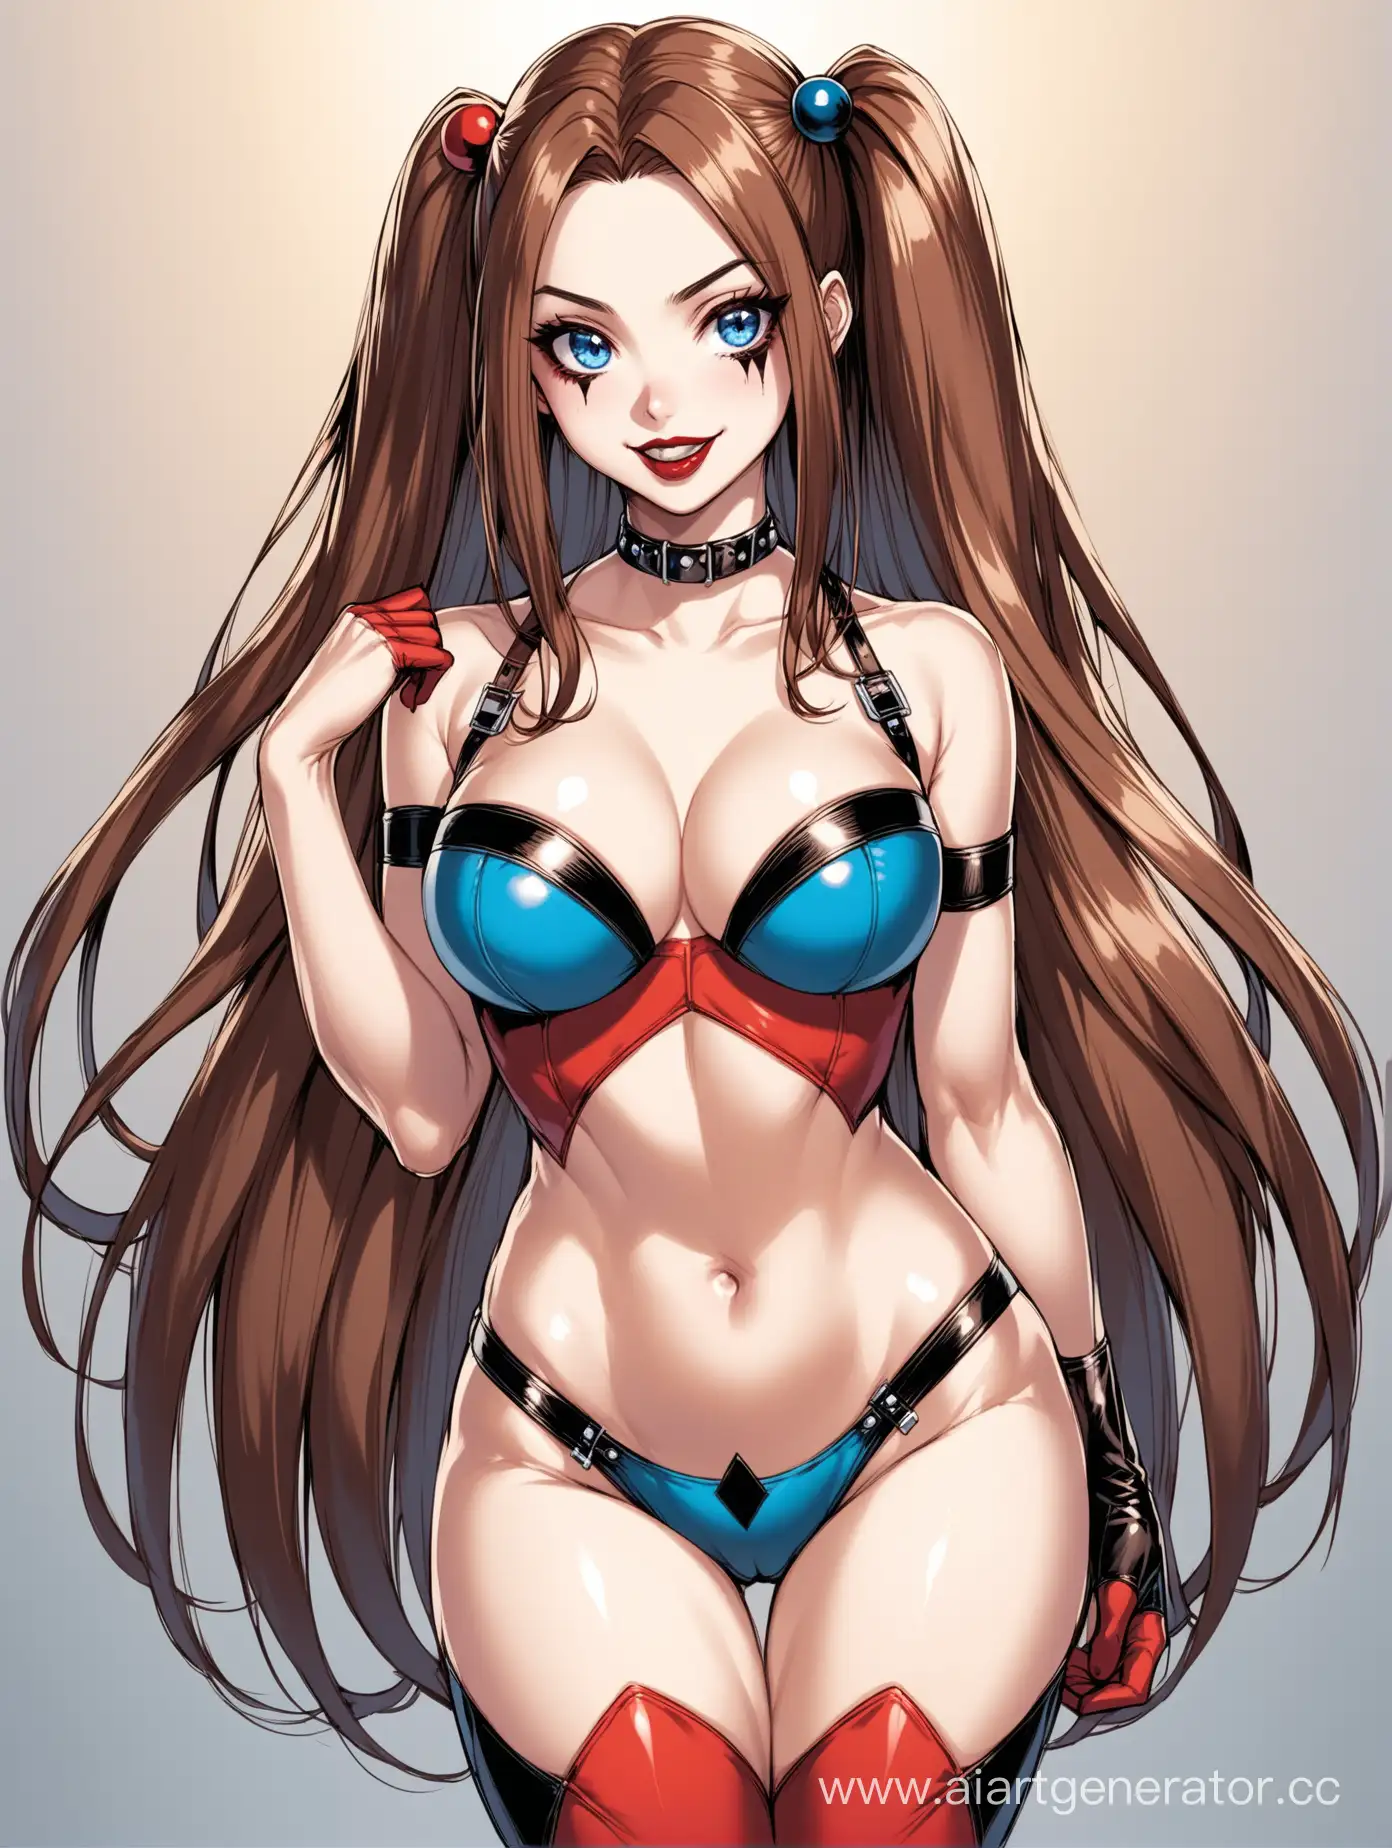 Feminine-Anime-Girl-Cosplaying-Harley-Quinn-with-Stunning-Blue-Eyes-and-Long-Brown-Hair